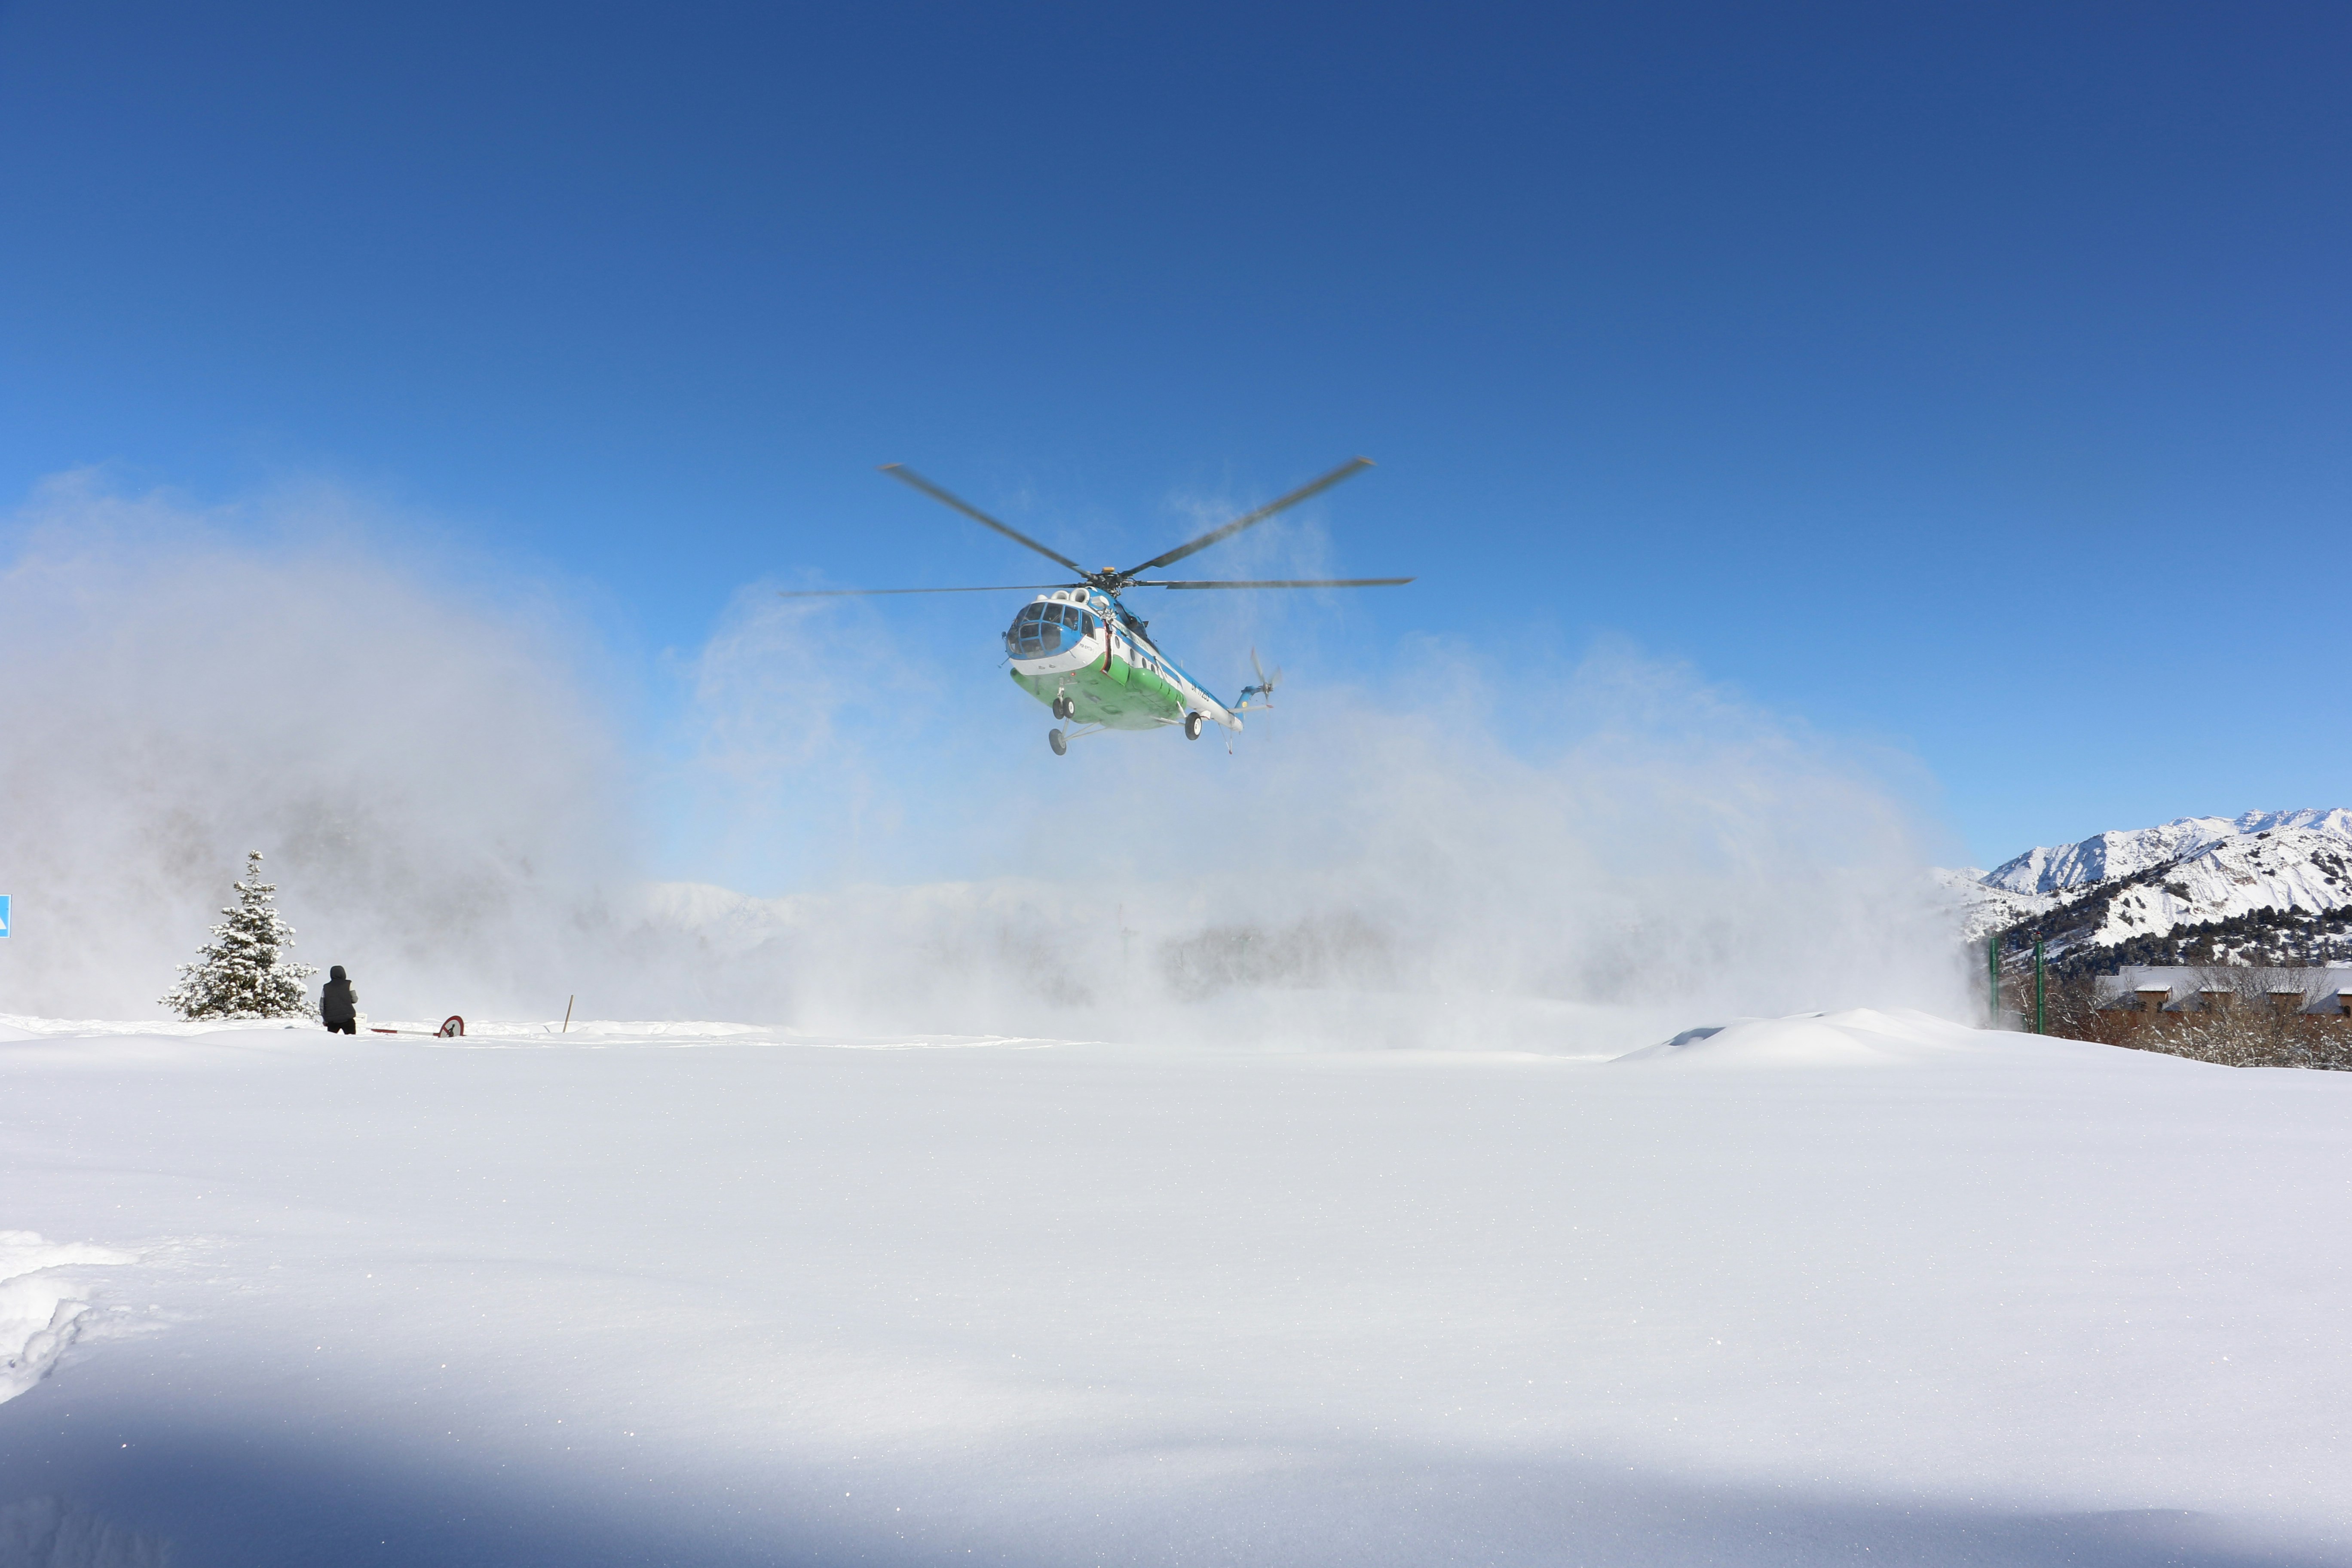 A Soviet Mi-8MTB helicopter takes off from a helipad. The ground is covered in snow and the sky is bright blue behind the white helicopter.